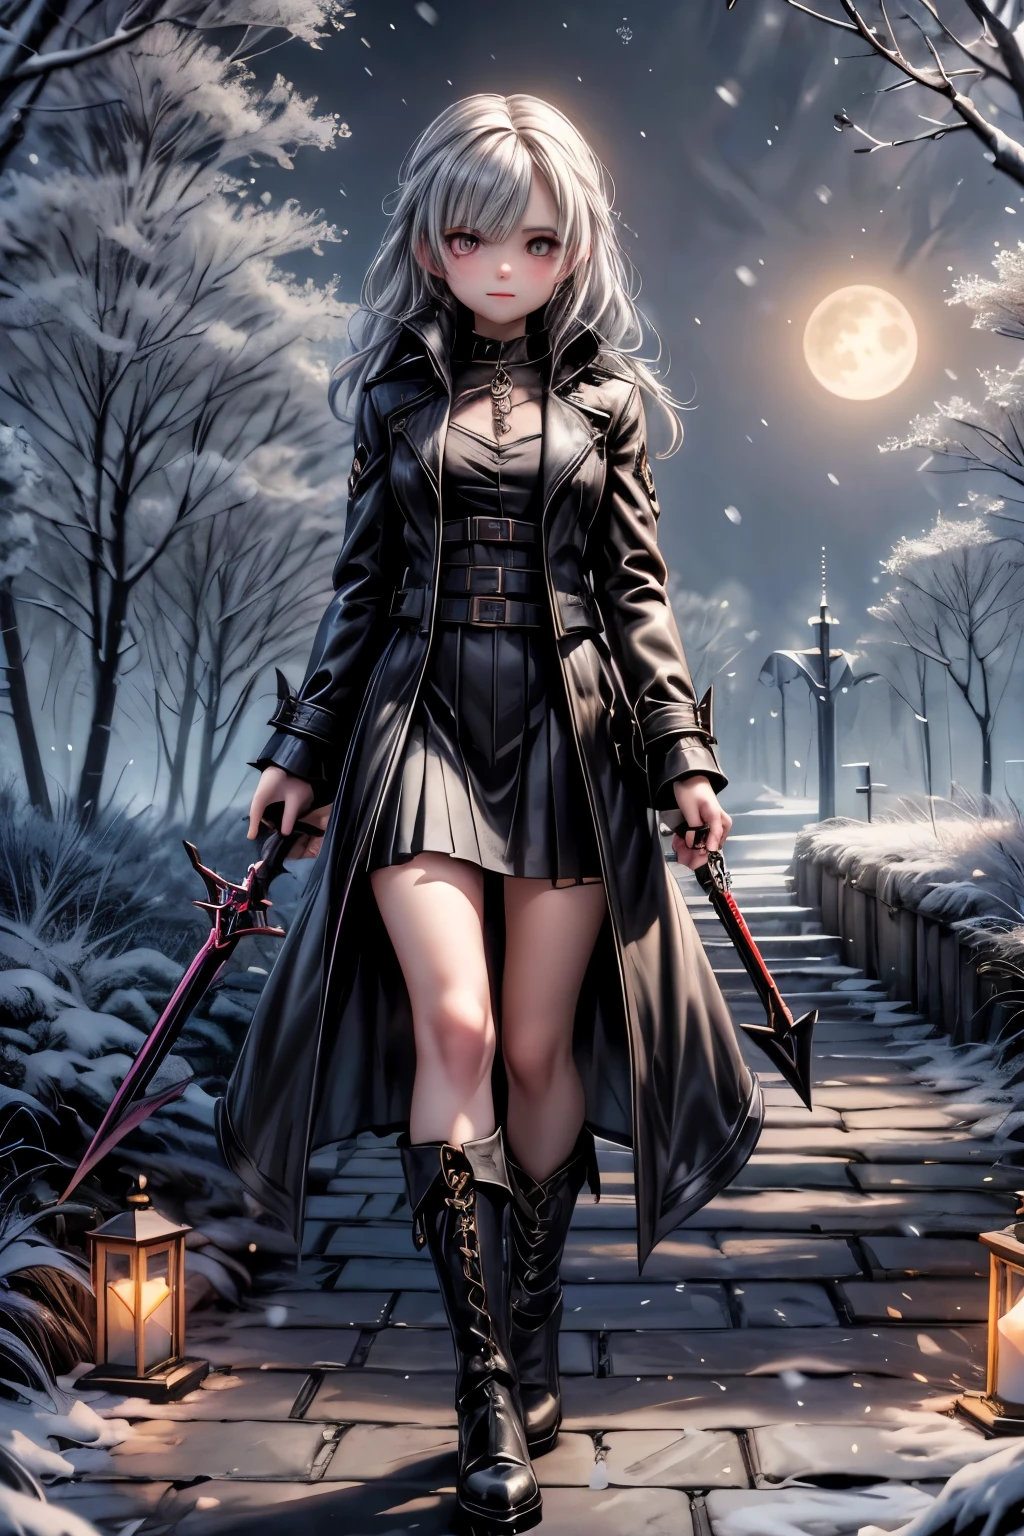 a vampire hunter girl wearing a Black Trench Coat and skirt, intrincated hairstyle, tighhighs, pumps, (reading a compass), icy woods at night, snowing at night, castlevania art style, moon, lanterns and candles floating all around the path